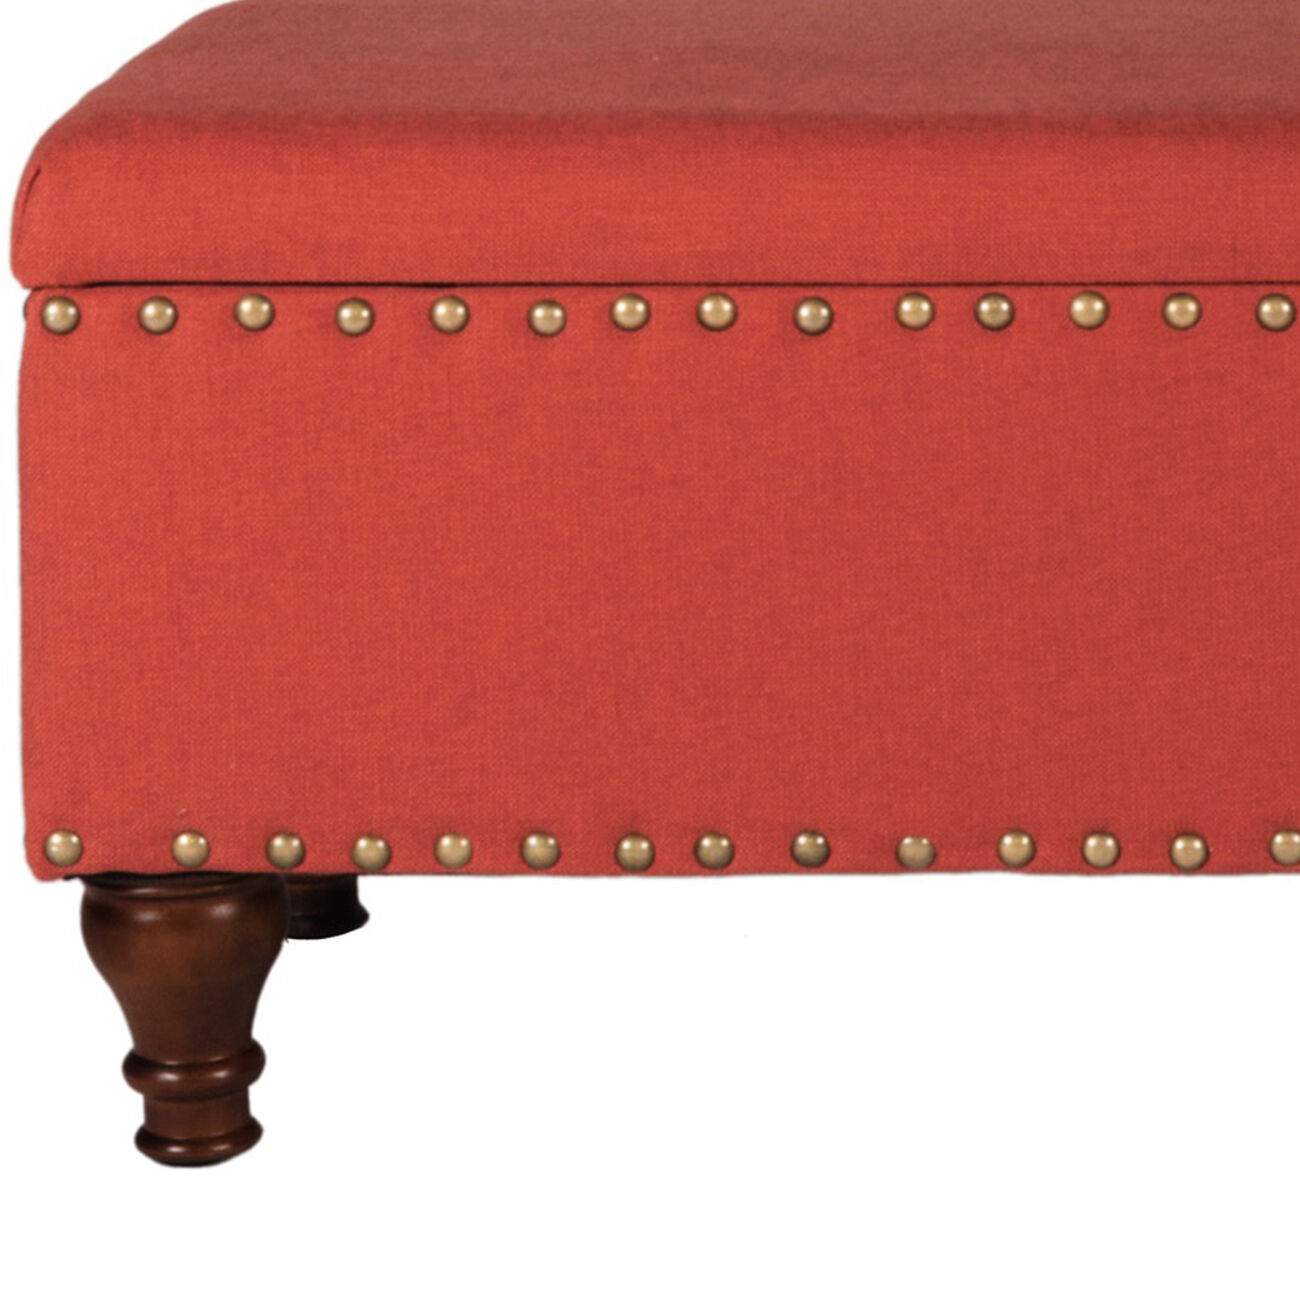 Fabric Upholstered Wooden Storage Bench With Nail head Trim, Large, Orange and Brown